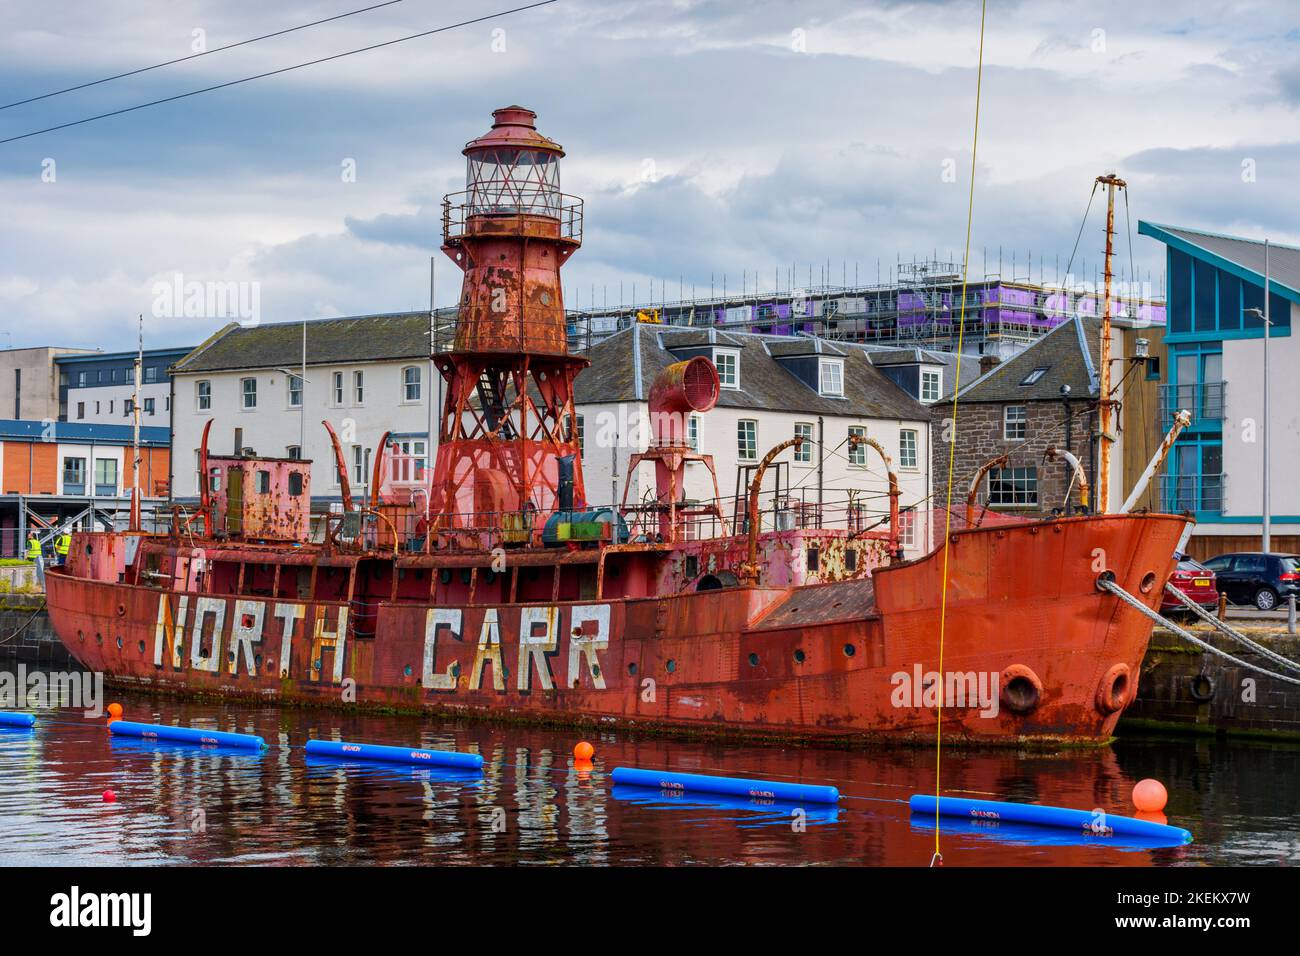 The North Carr lightship, the last remaining Scottish lightship, built 1933, West Victoria Dock, Dundee, Scotland, UK Stock Photo